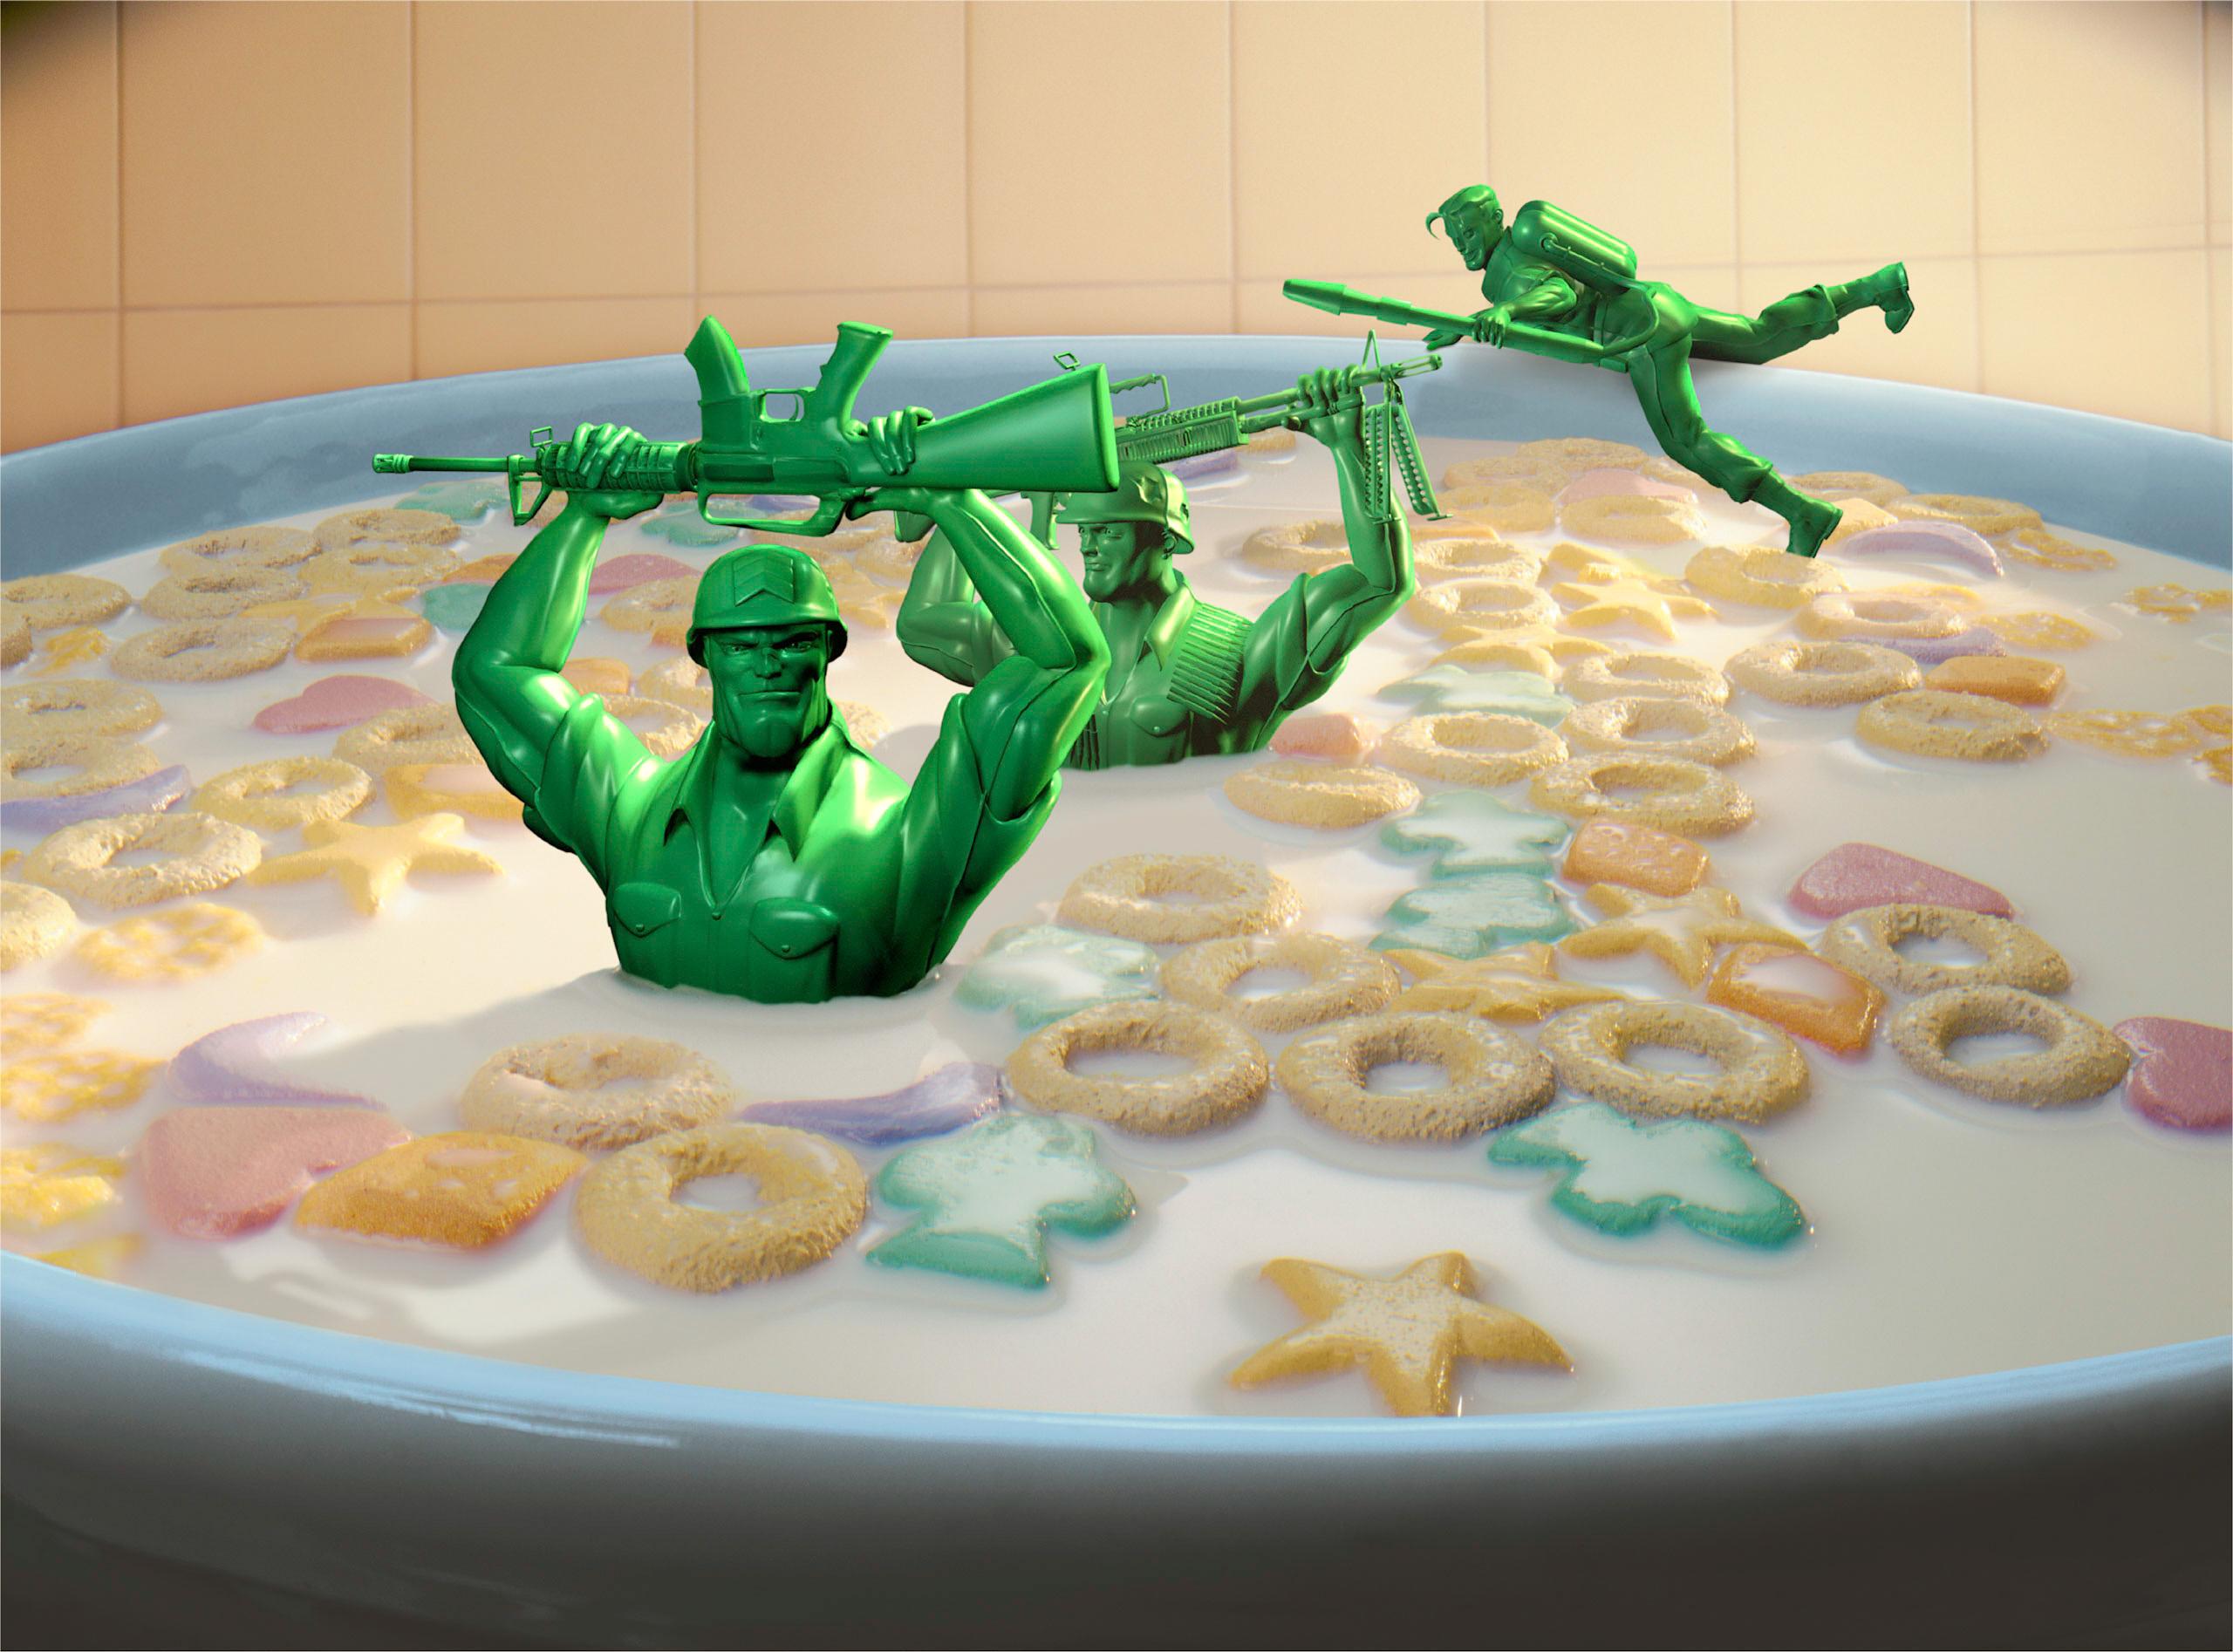 Nick Vedros Figurative Photograph - Army Men in Cereal Bowl